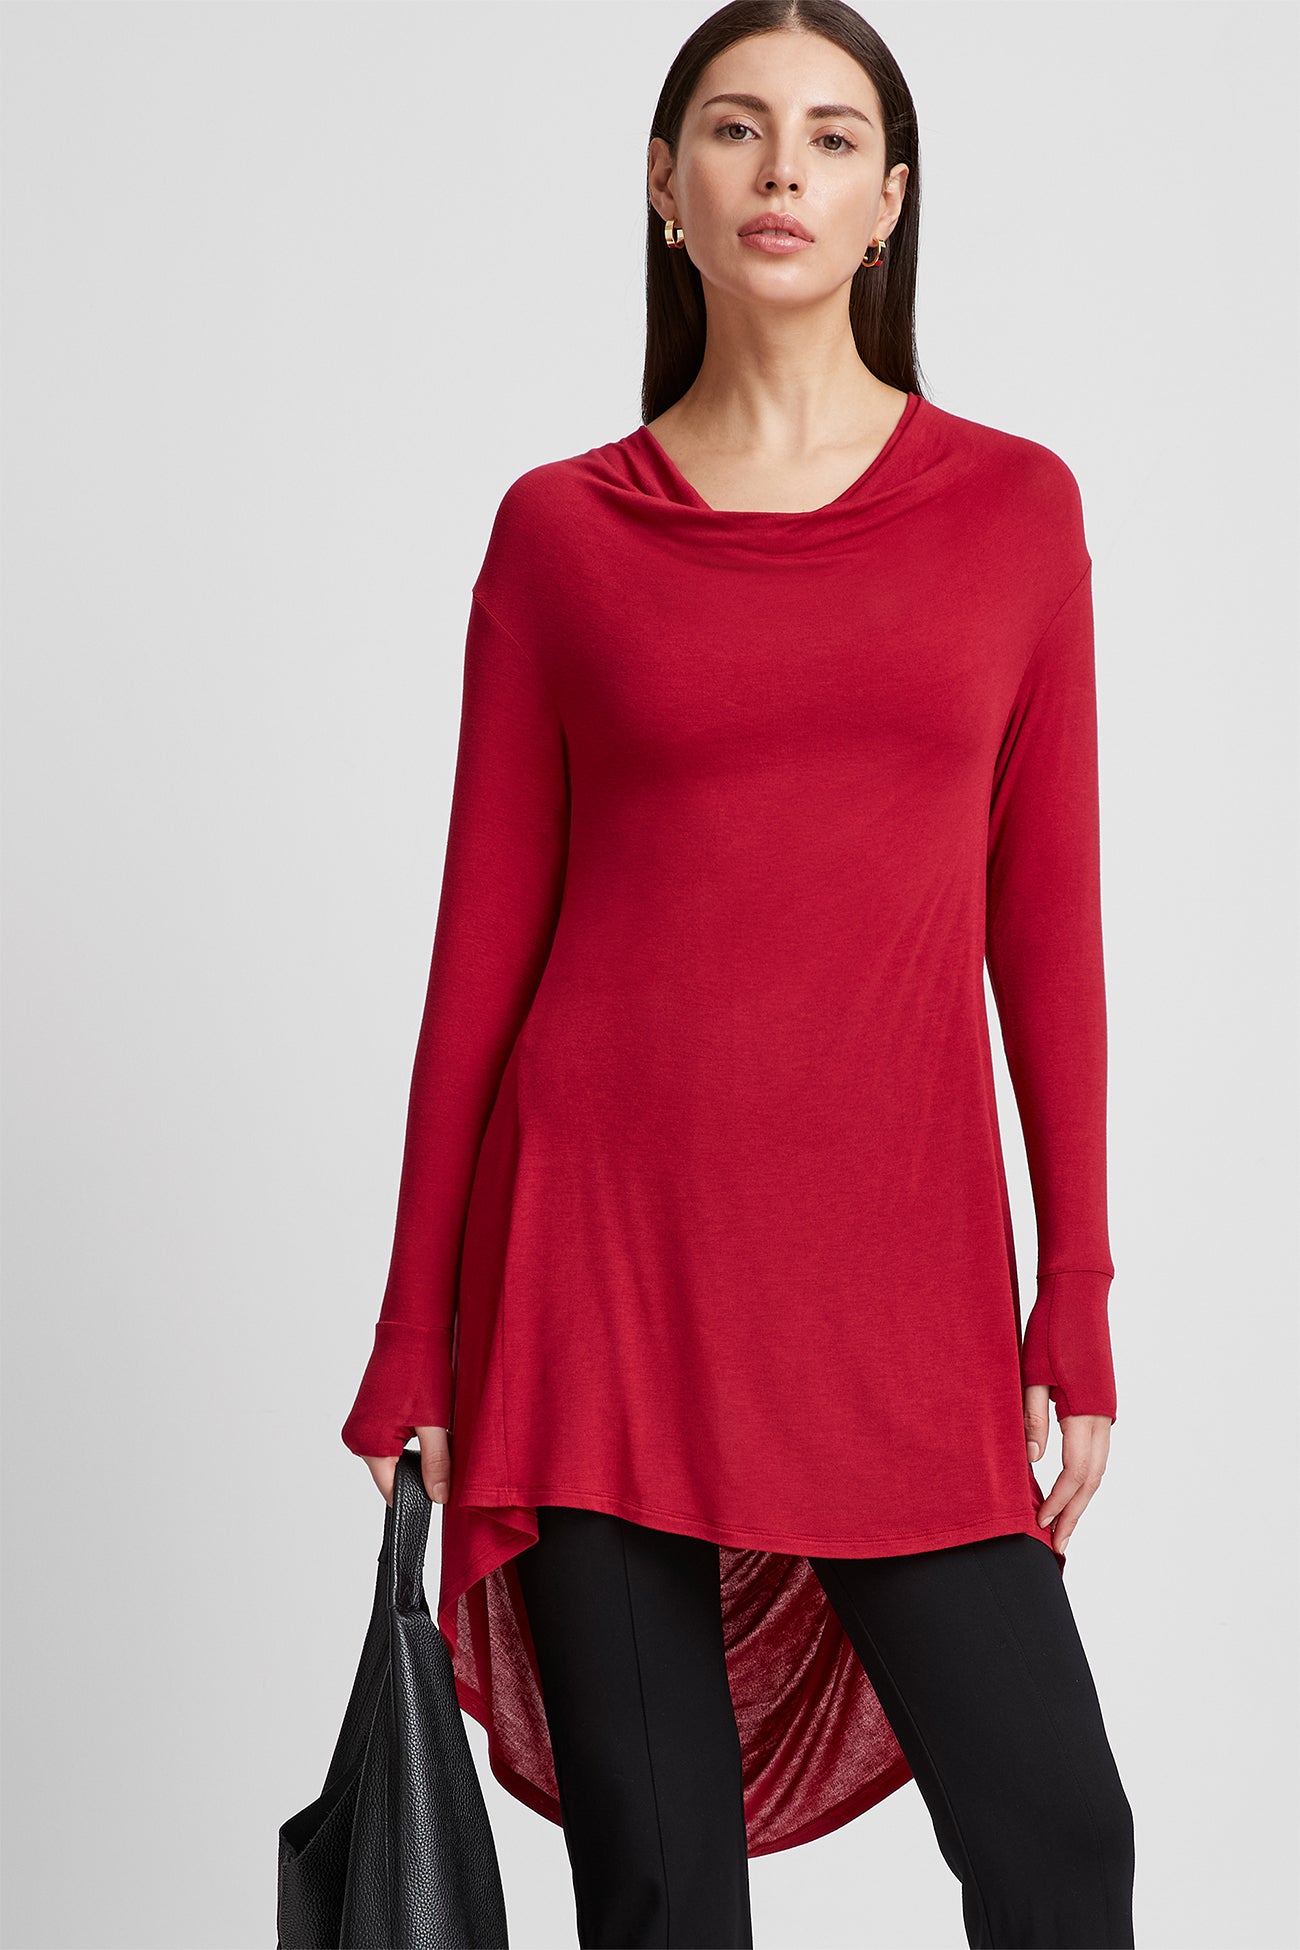 Black Off-The-Shoulder Back Tunic - Yorkville Tunic | Marcella